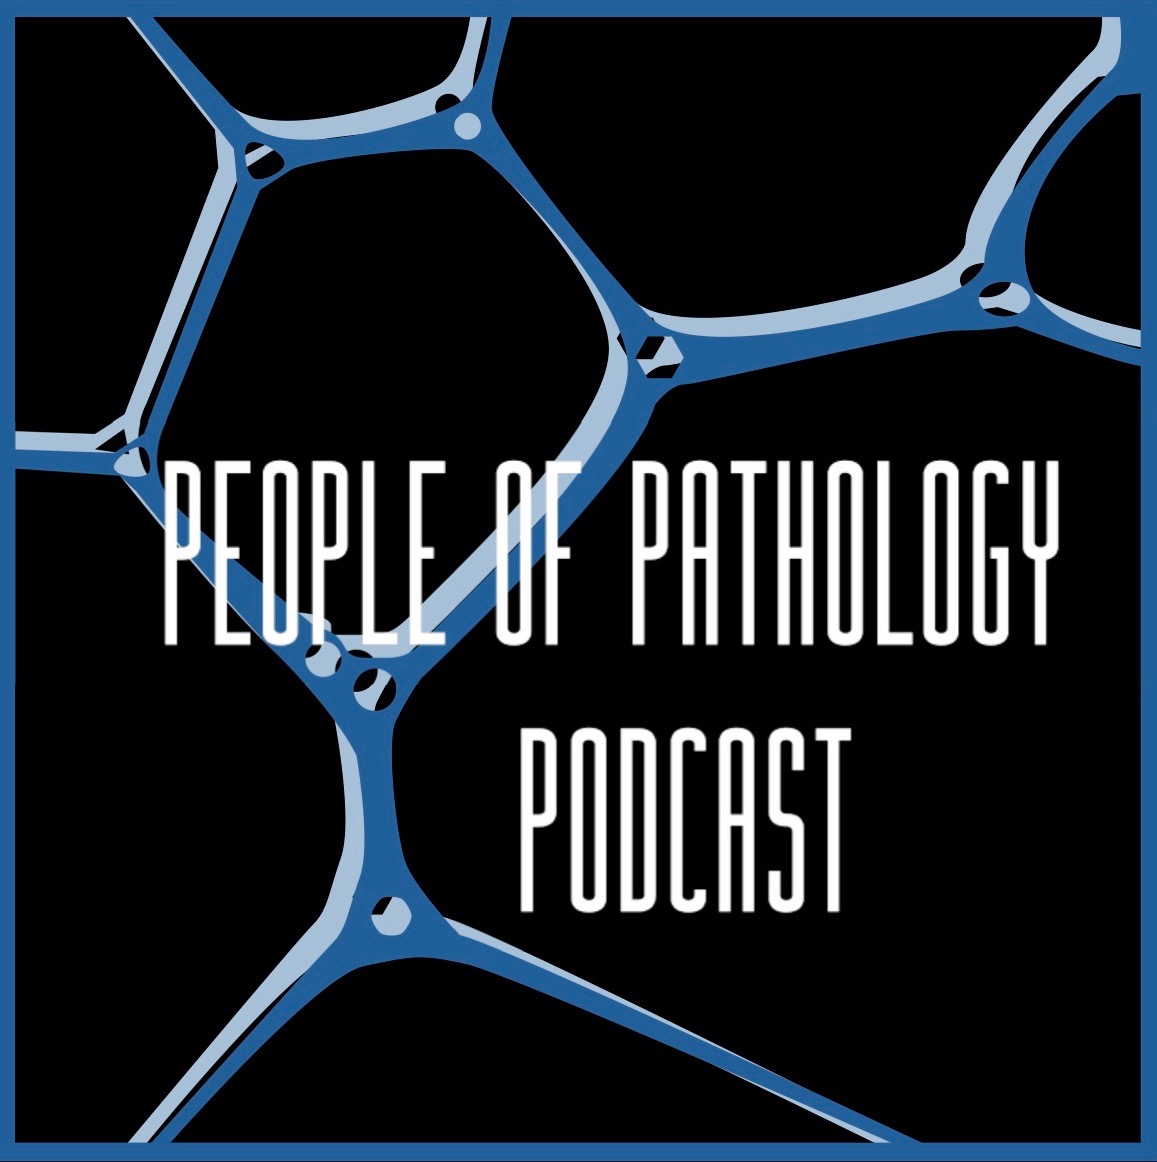 Episode 40: Dr Evi Abada – Pathology and Global Public Health, and 500 Women Scientists